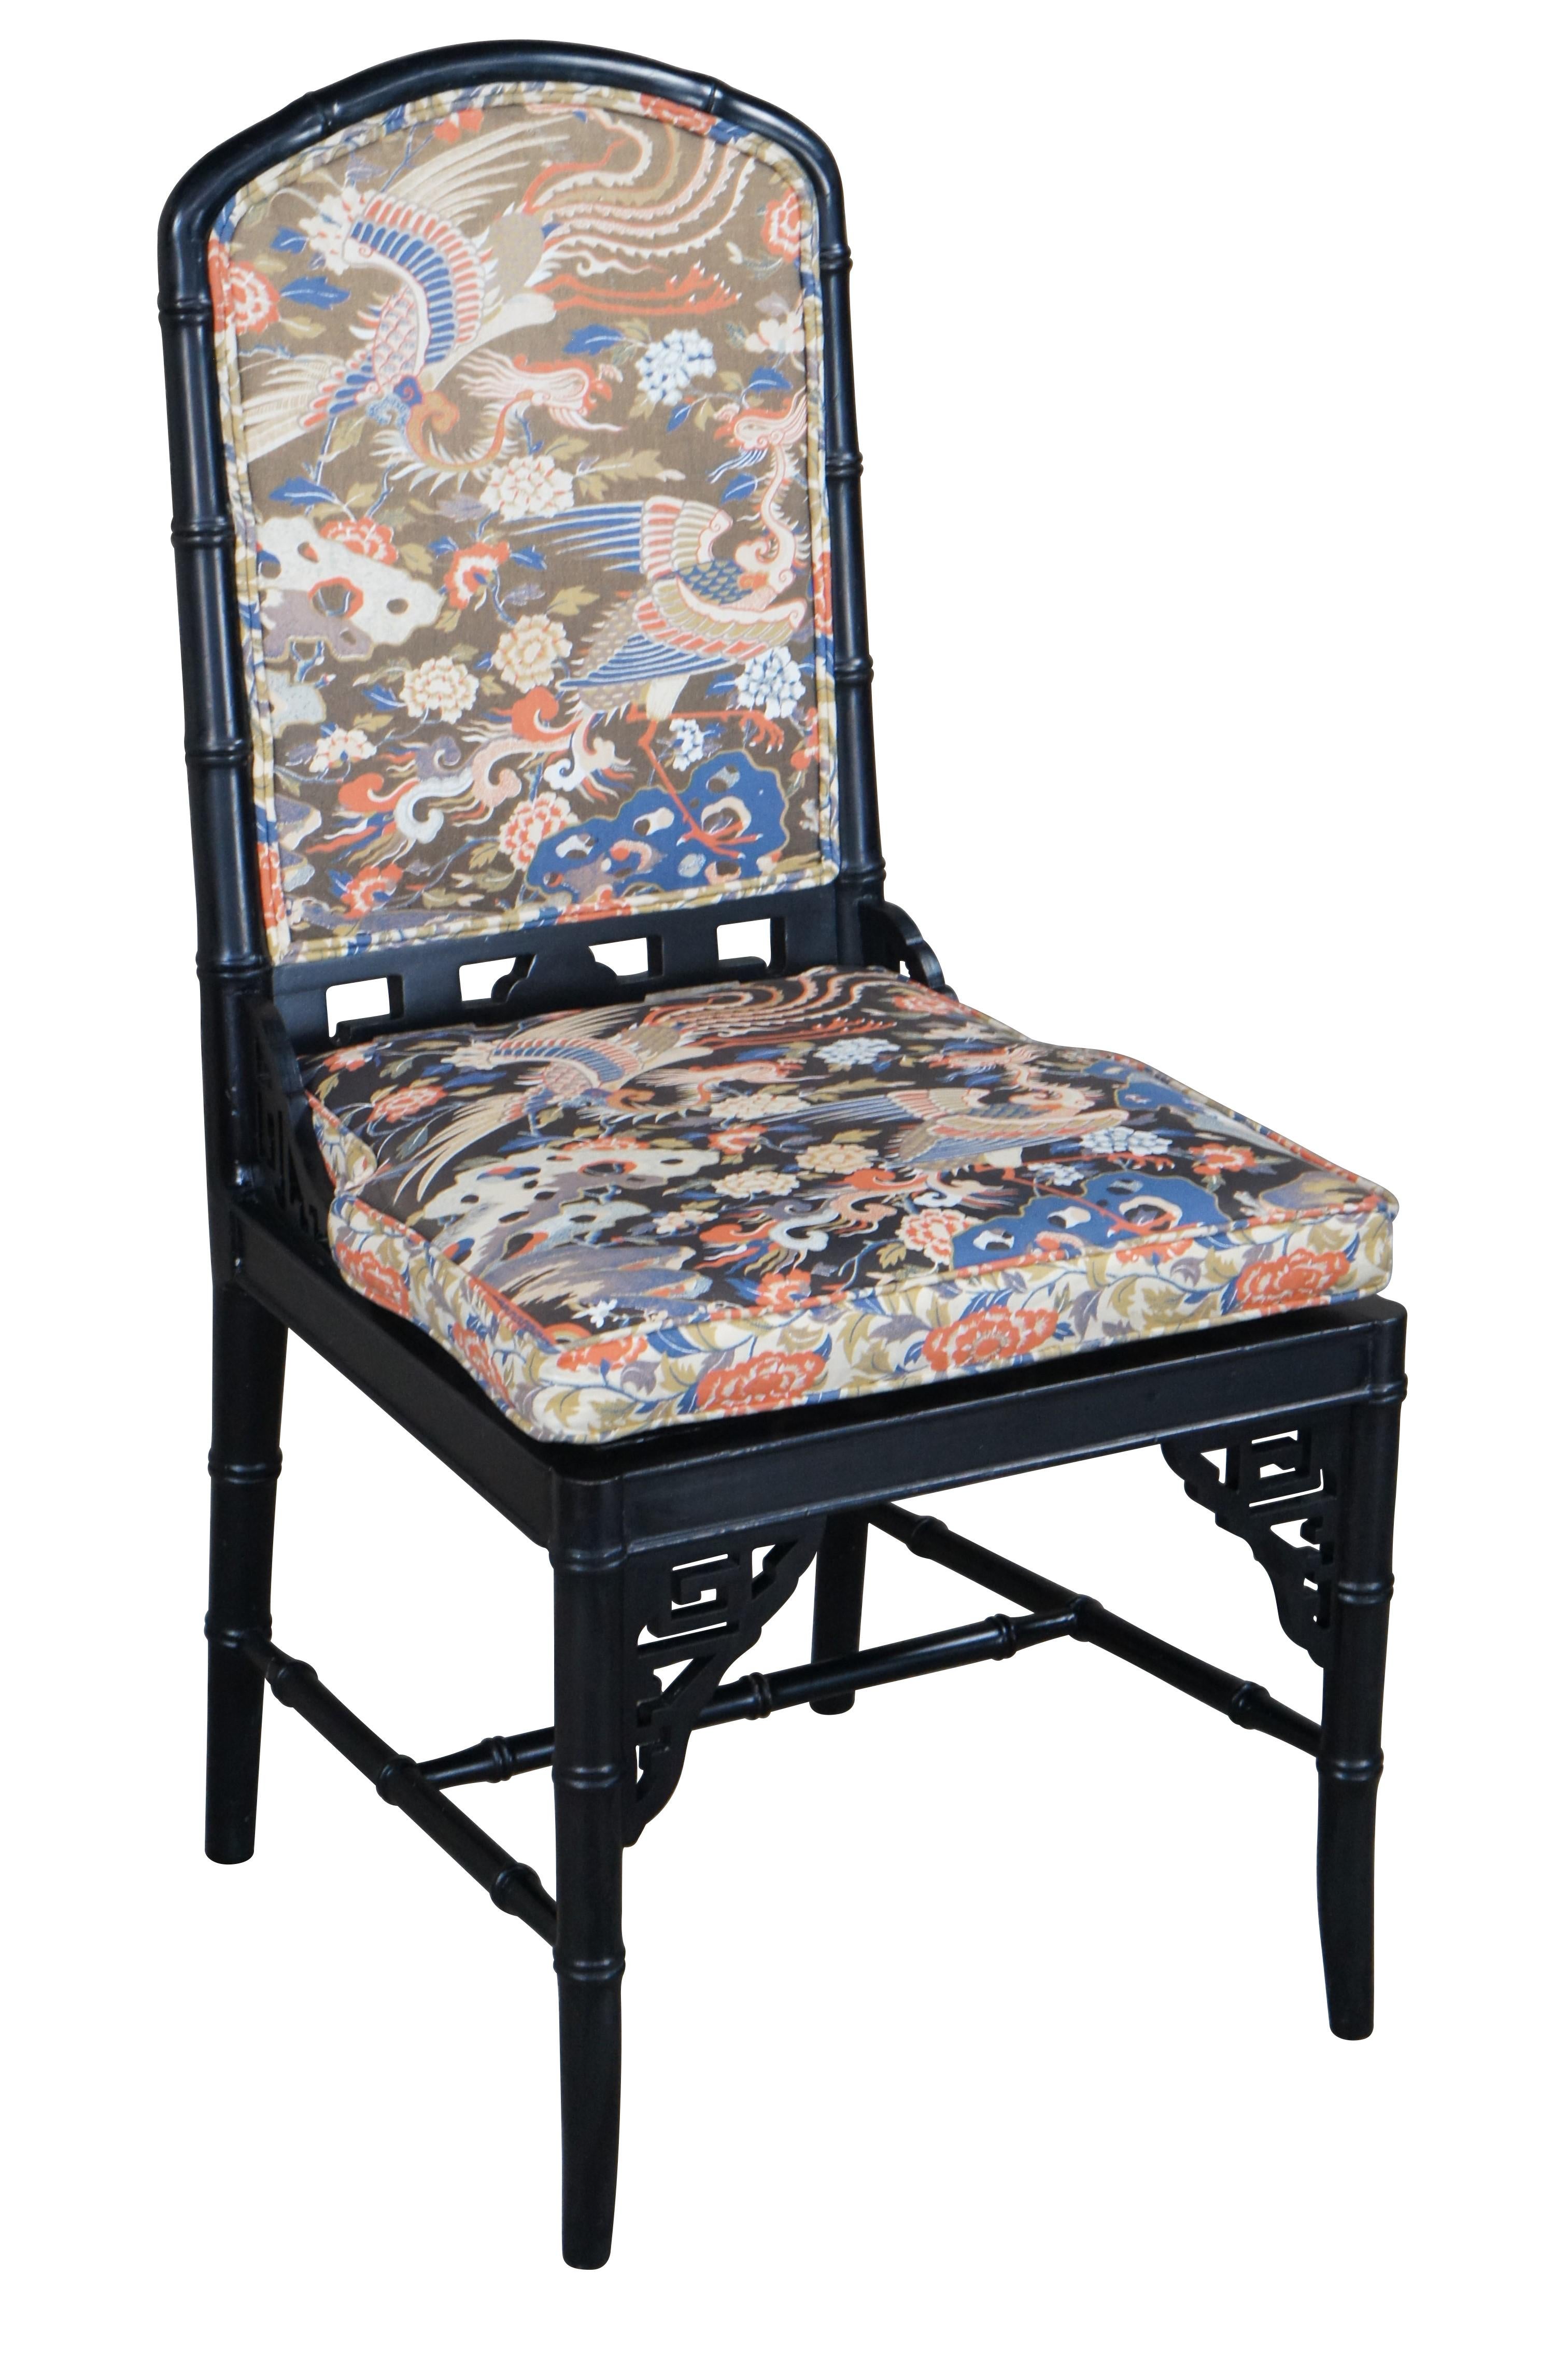 4 Chinese Chinoiserie Faux Bamboo Black Lacquer Caned Crane Dining Chairs In Good Condition For Sale In Dayton, OH